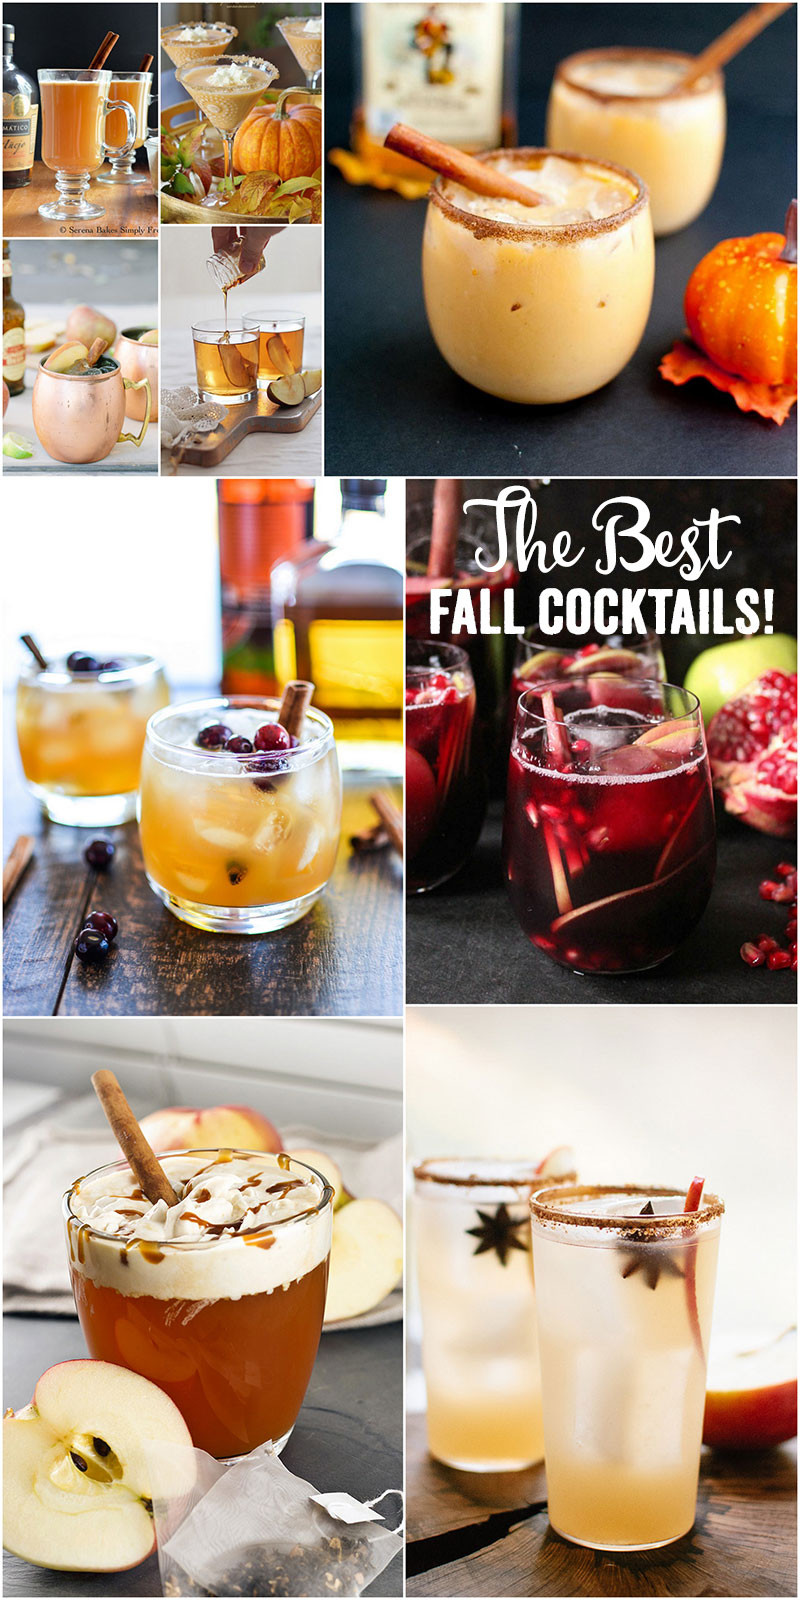 Fall Drink Ideas
 9 Fall Cocktails You Need to Try STAT